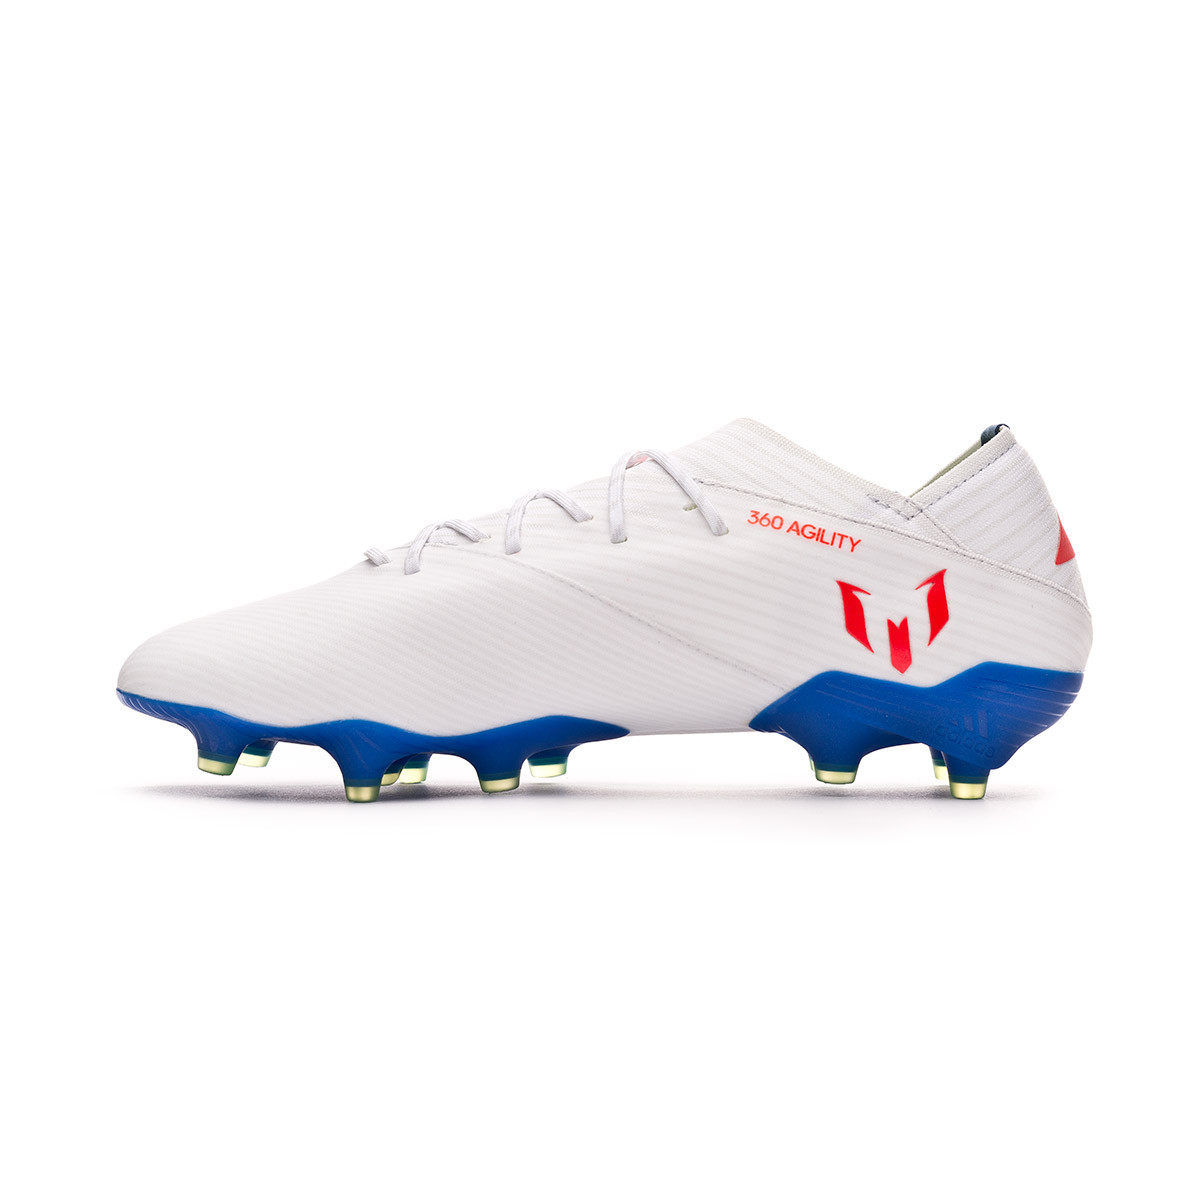 messi soccer cleats 219